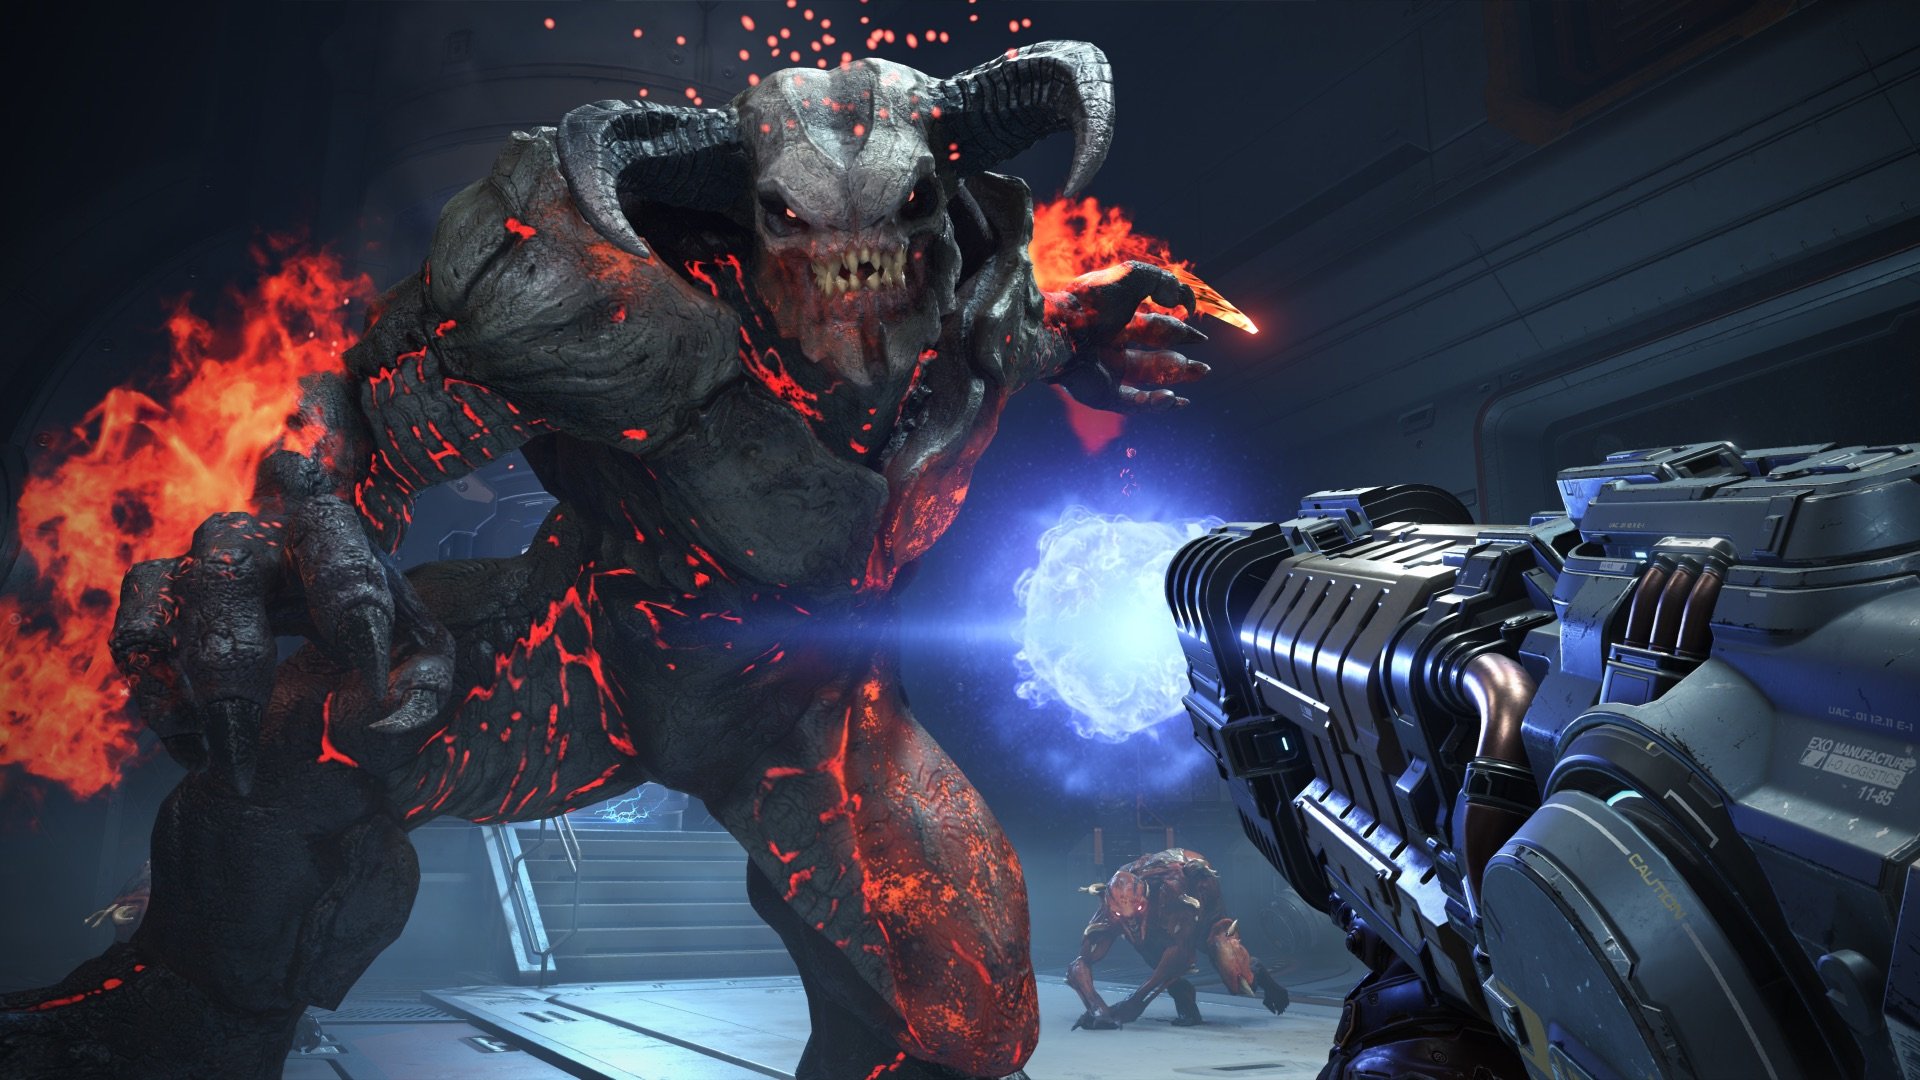 Doom Eternal Next Gen Update Includes Raytracing Support for the PS5